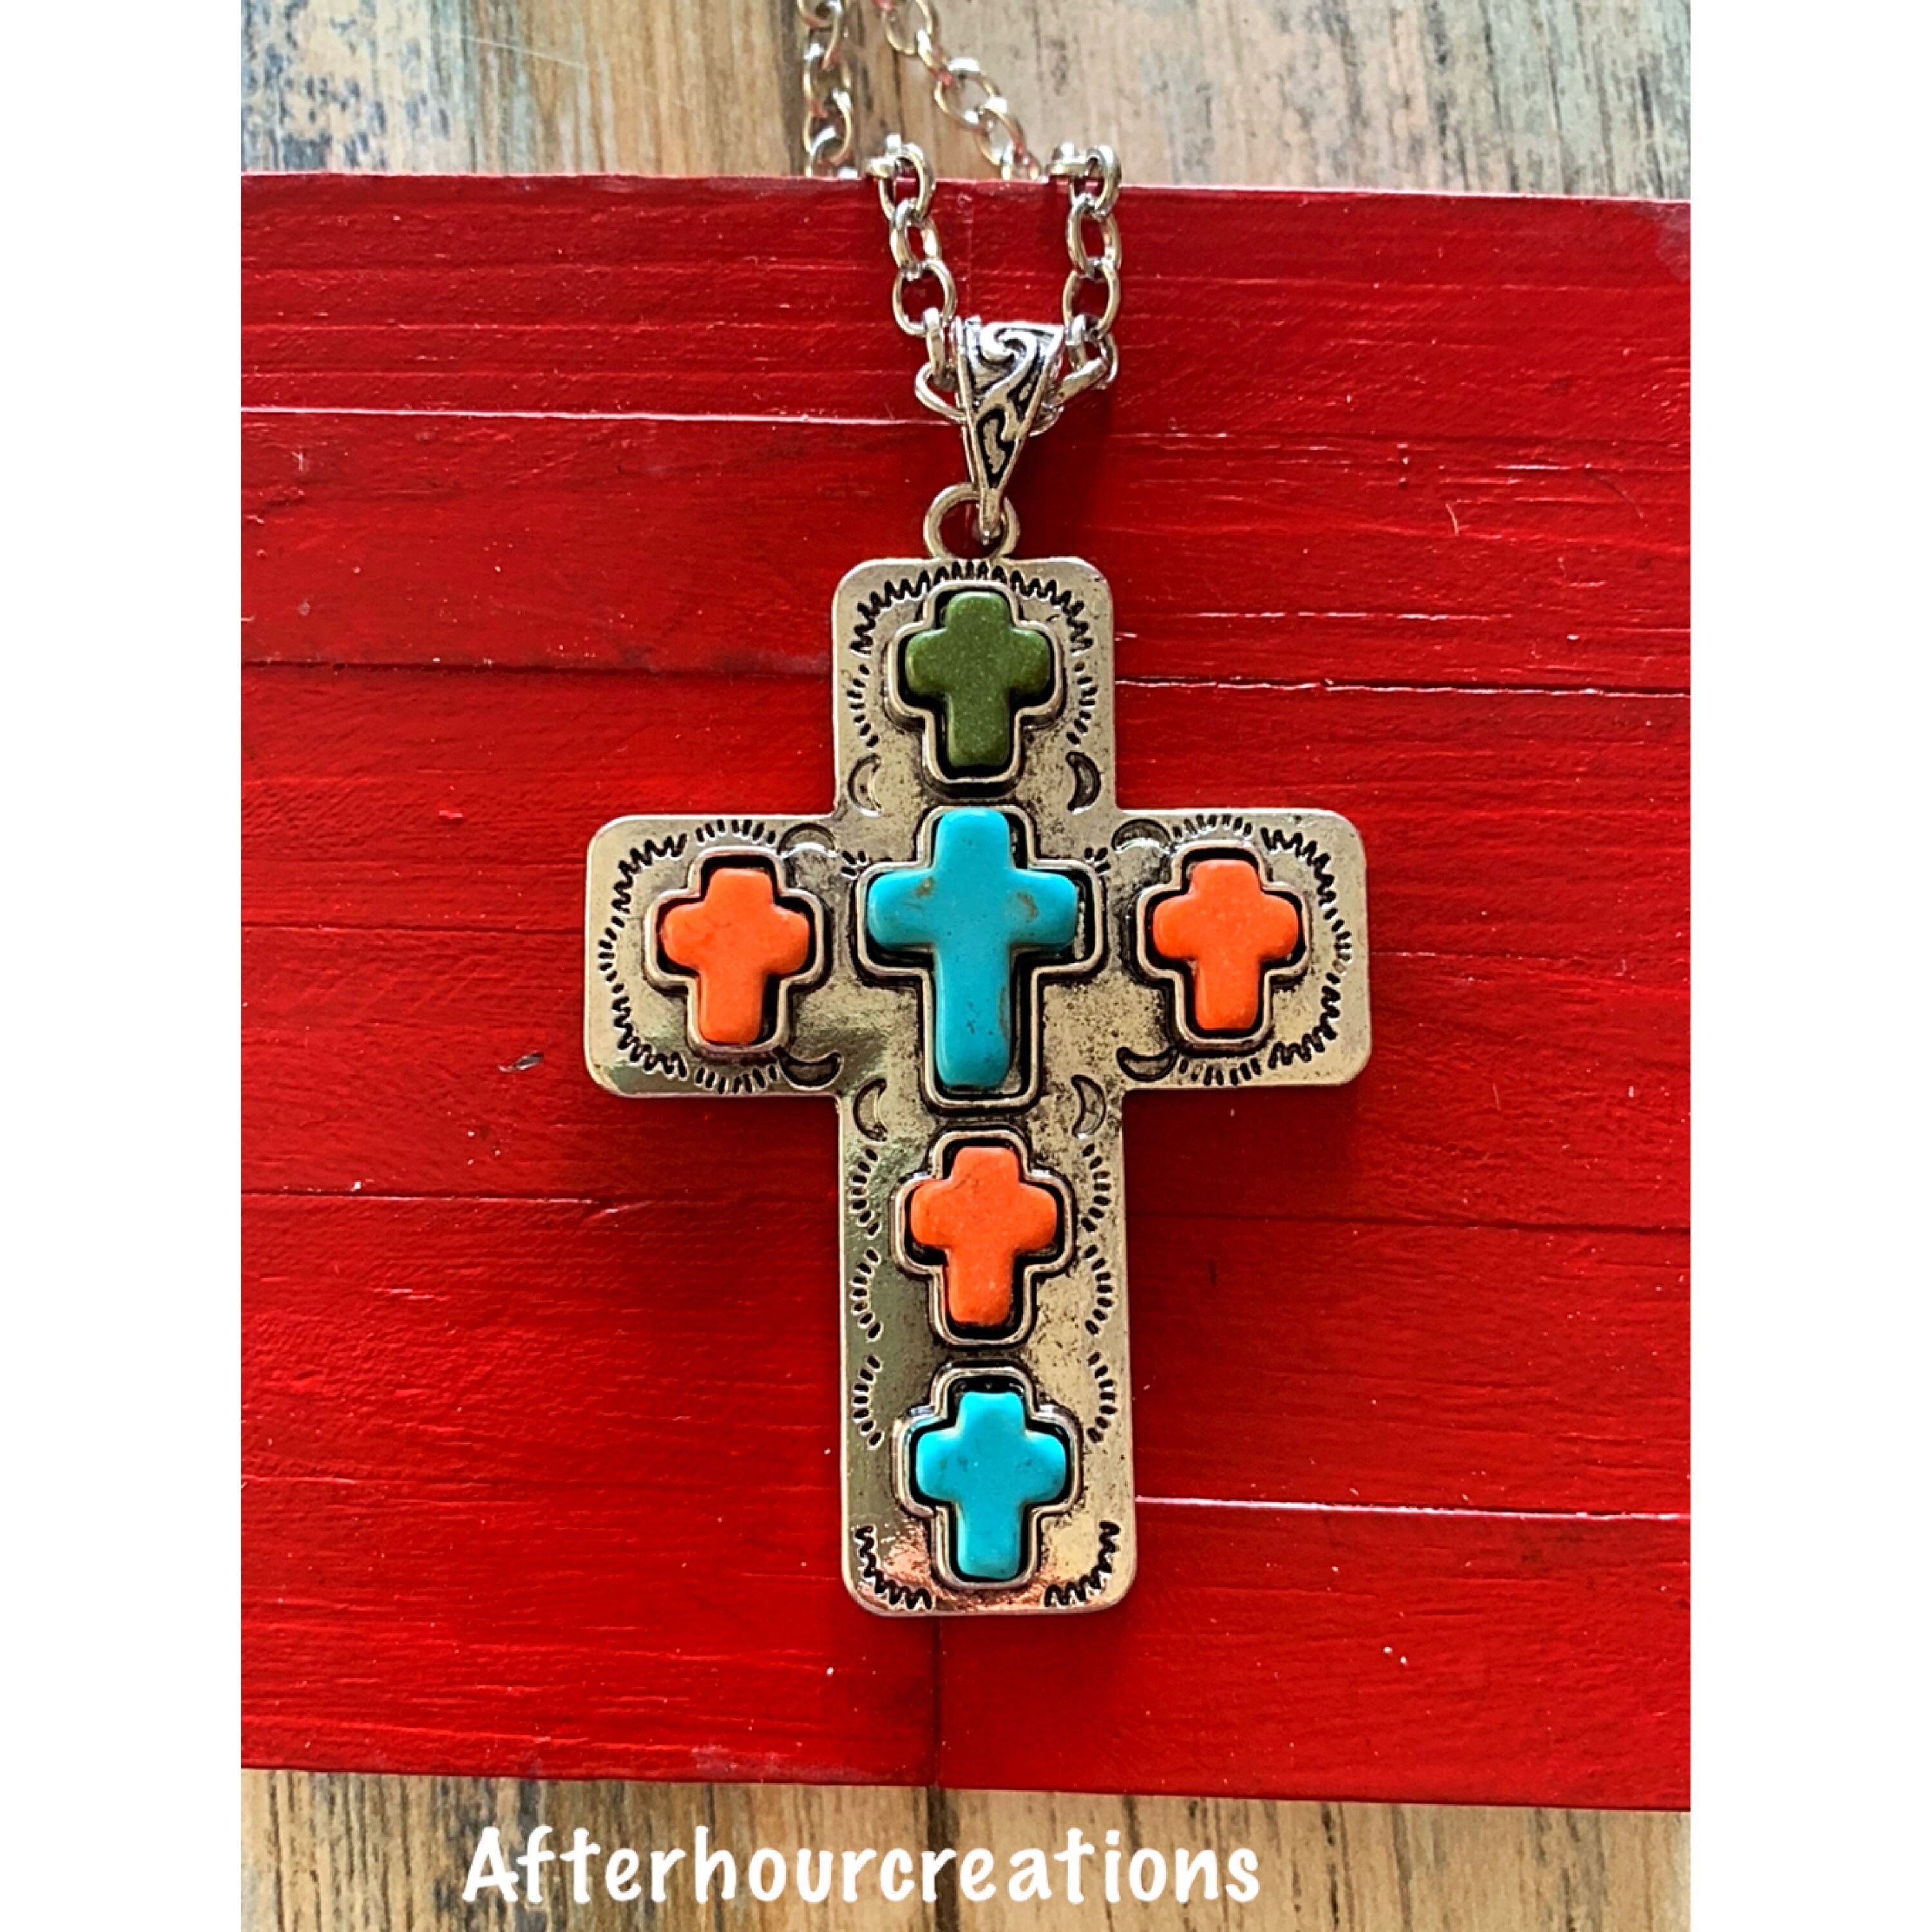 M&F Western Womens Jewelry Necklace Cross Two Tone Turquoise 30302 